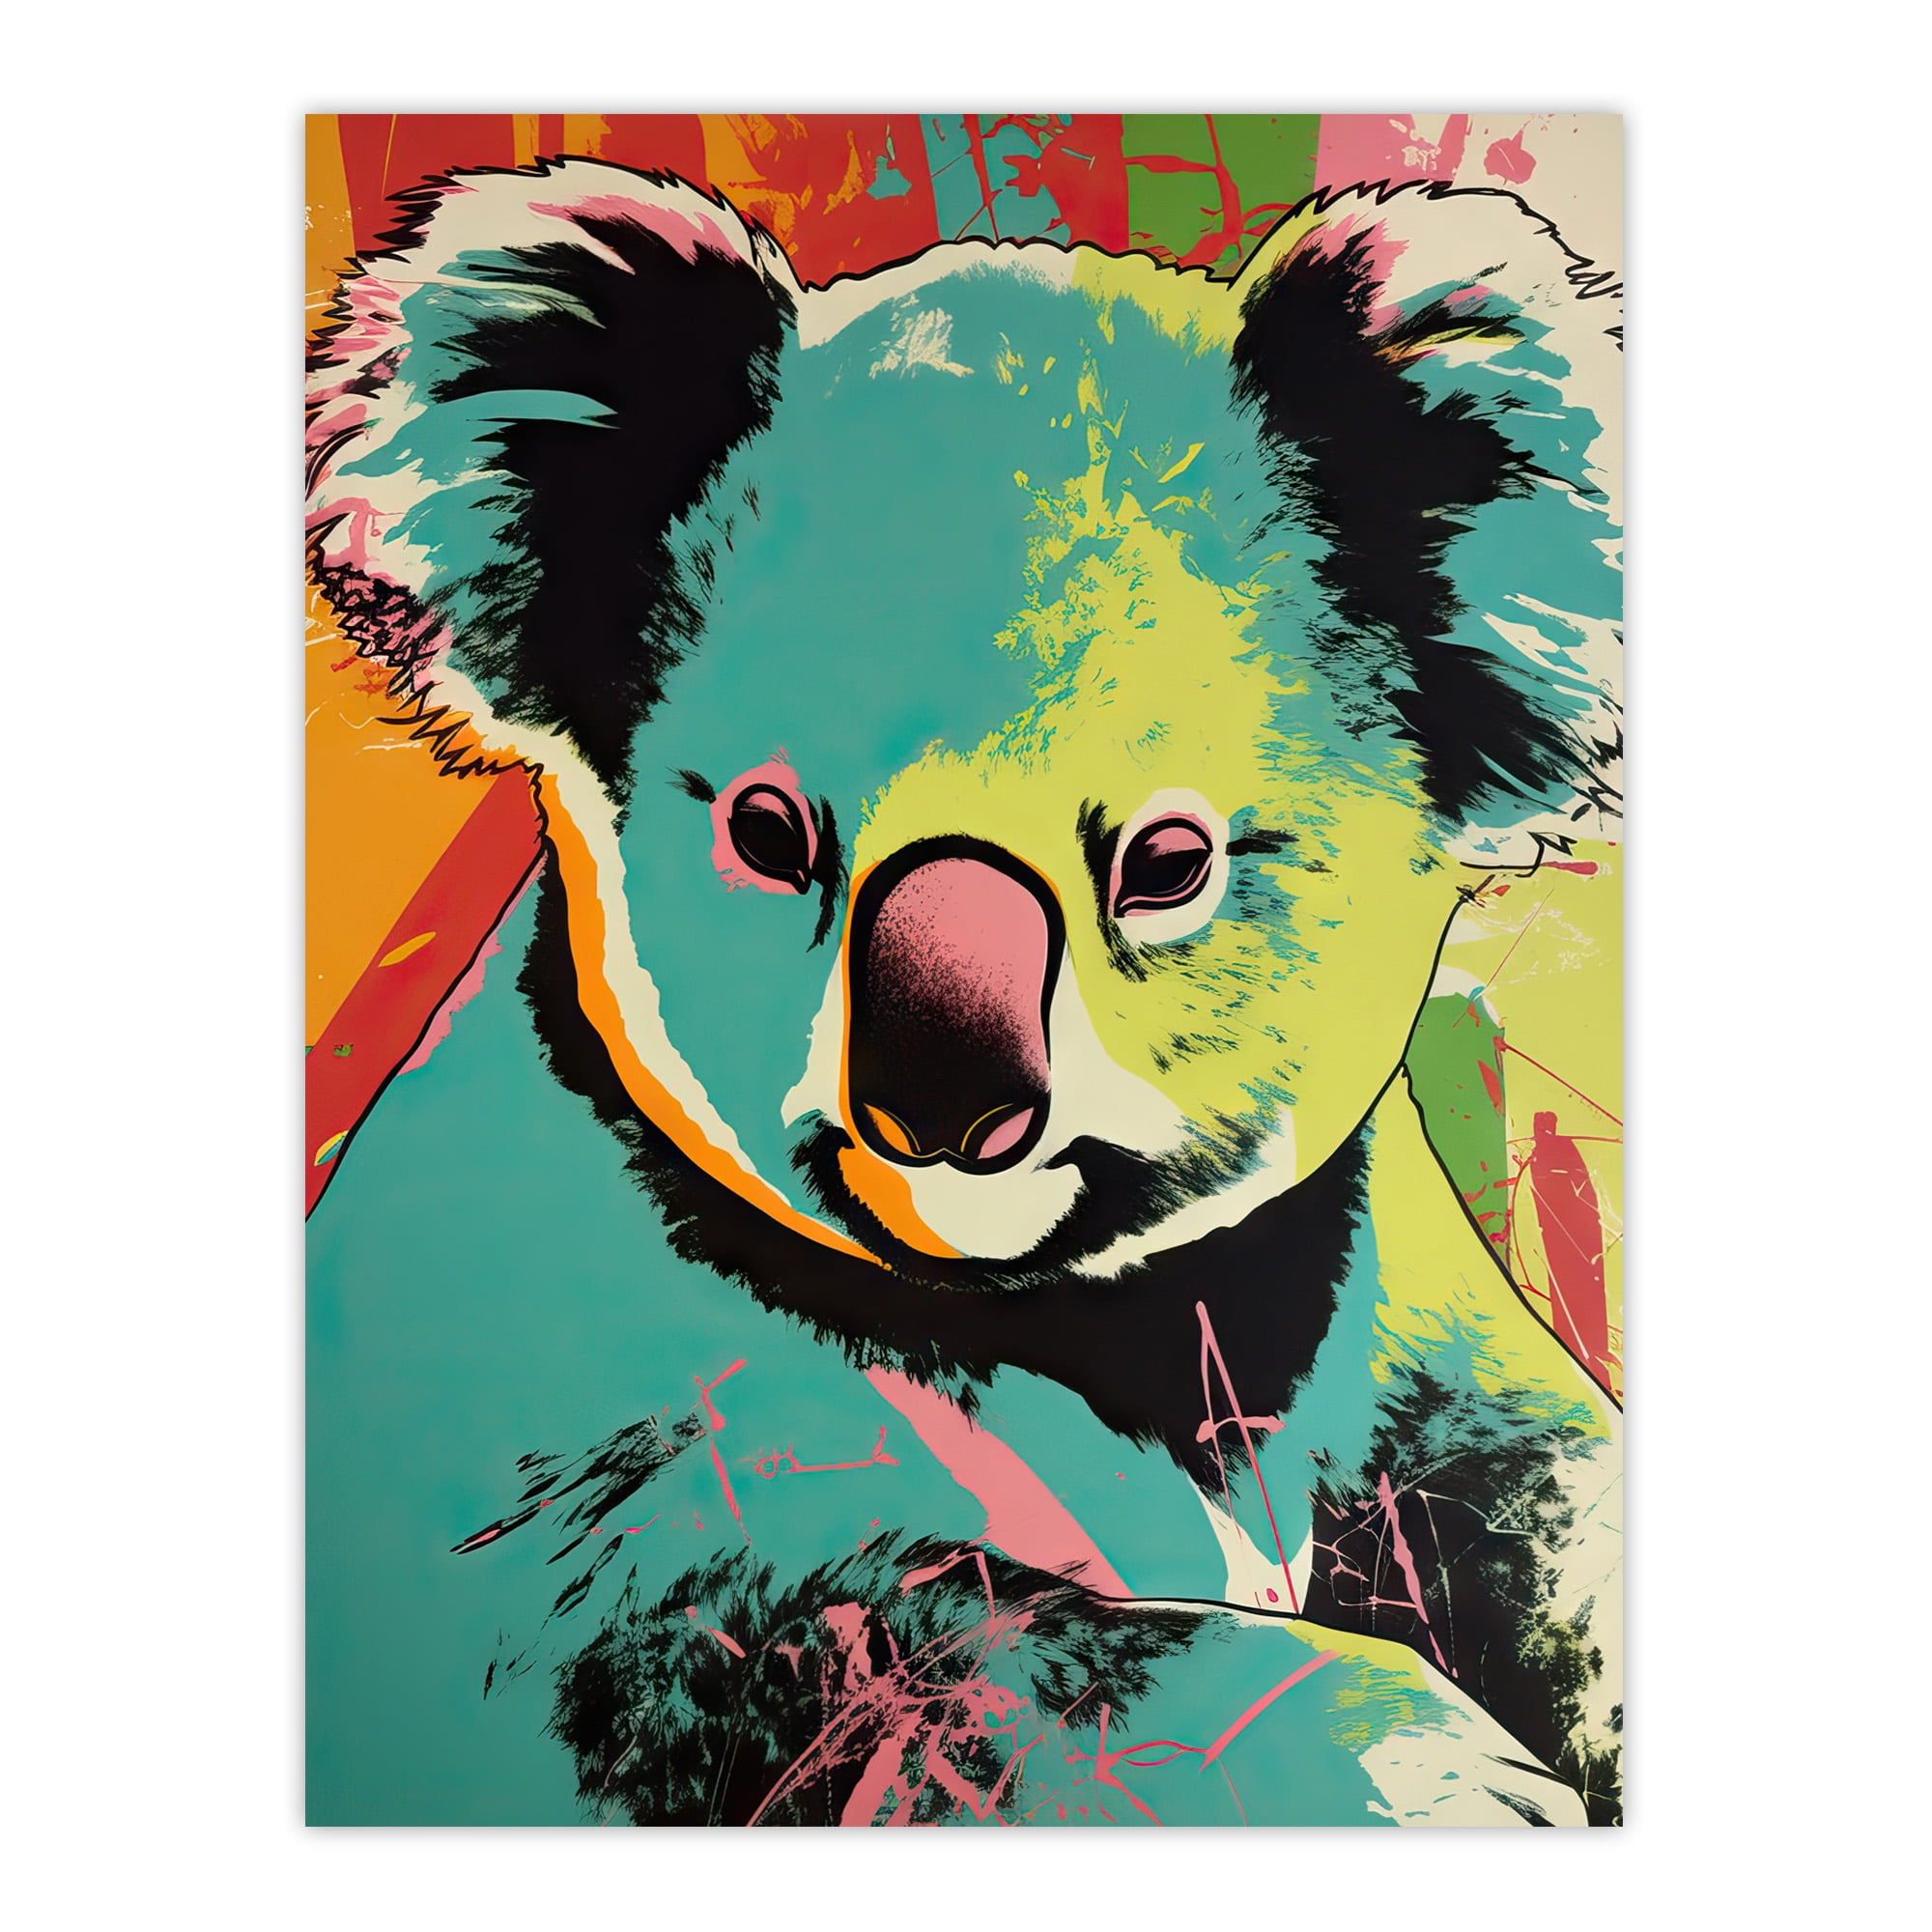 Koala Bear Abstract Teal And Orange Artwork Animal Portrait Vibrant Bold  Bright Colourful Painting Extra Large XL Wall Art Poster Print